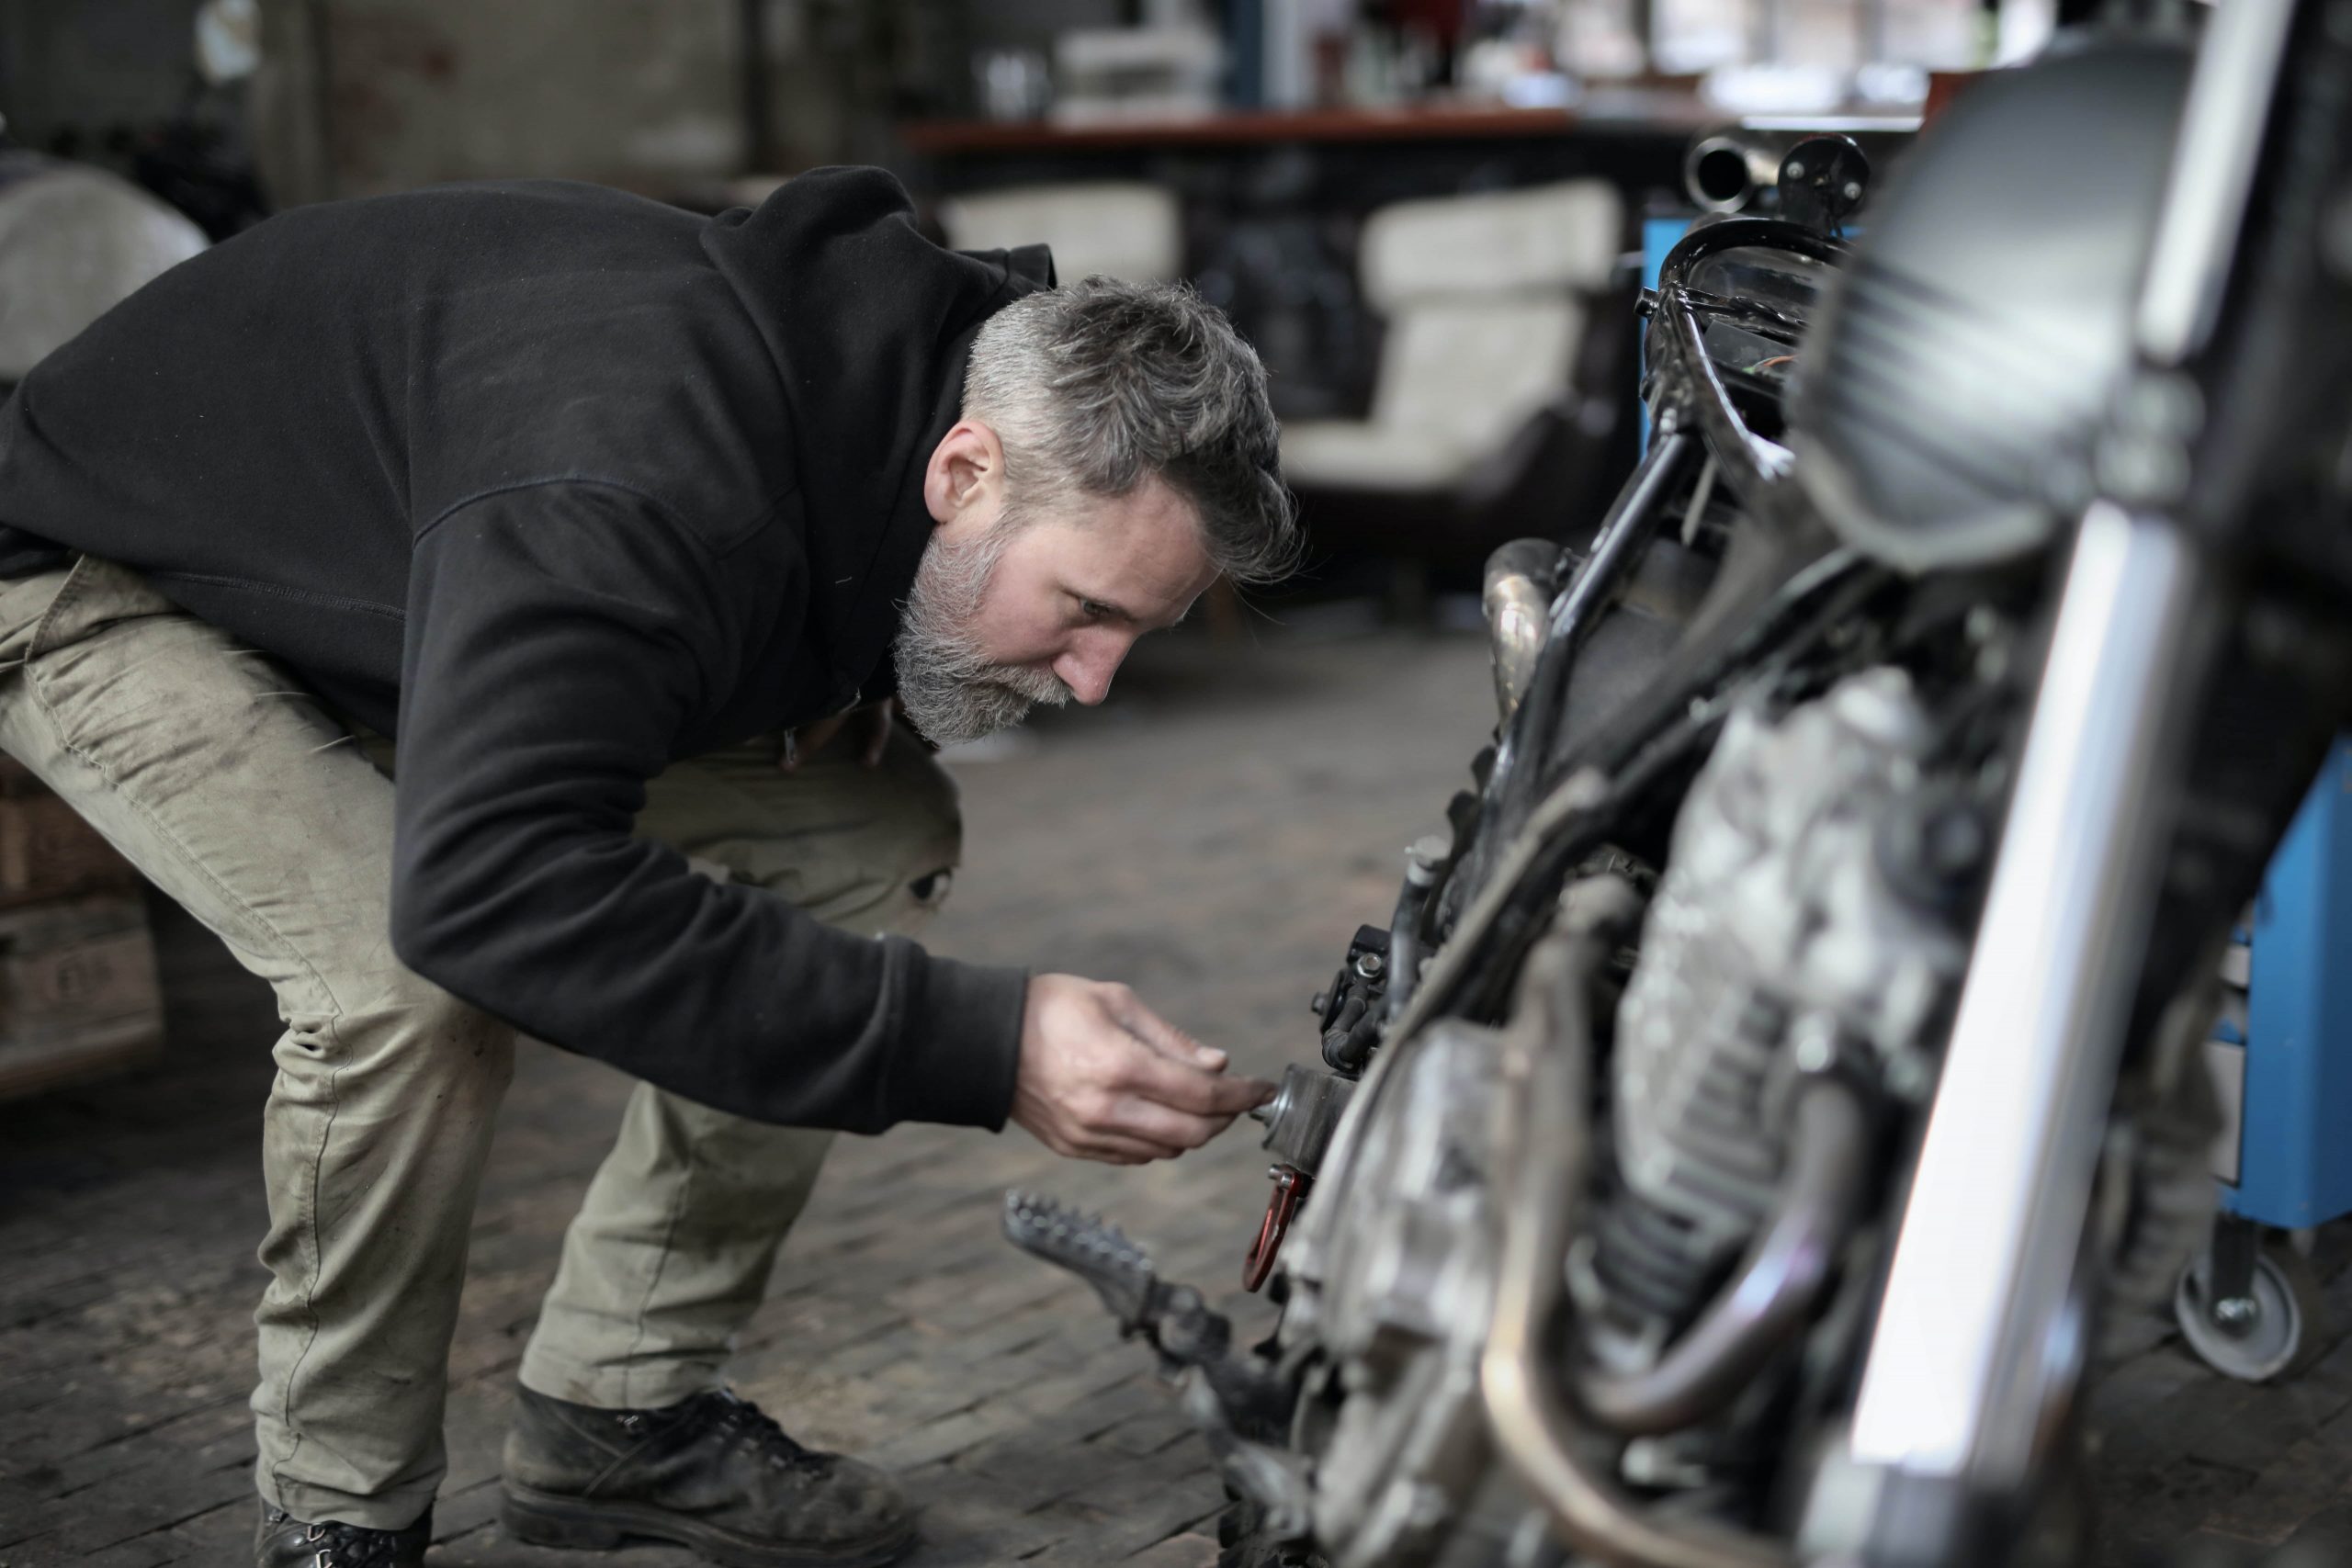 Motor Cycle Inspection